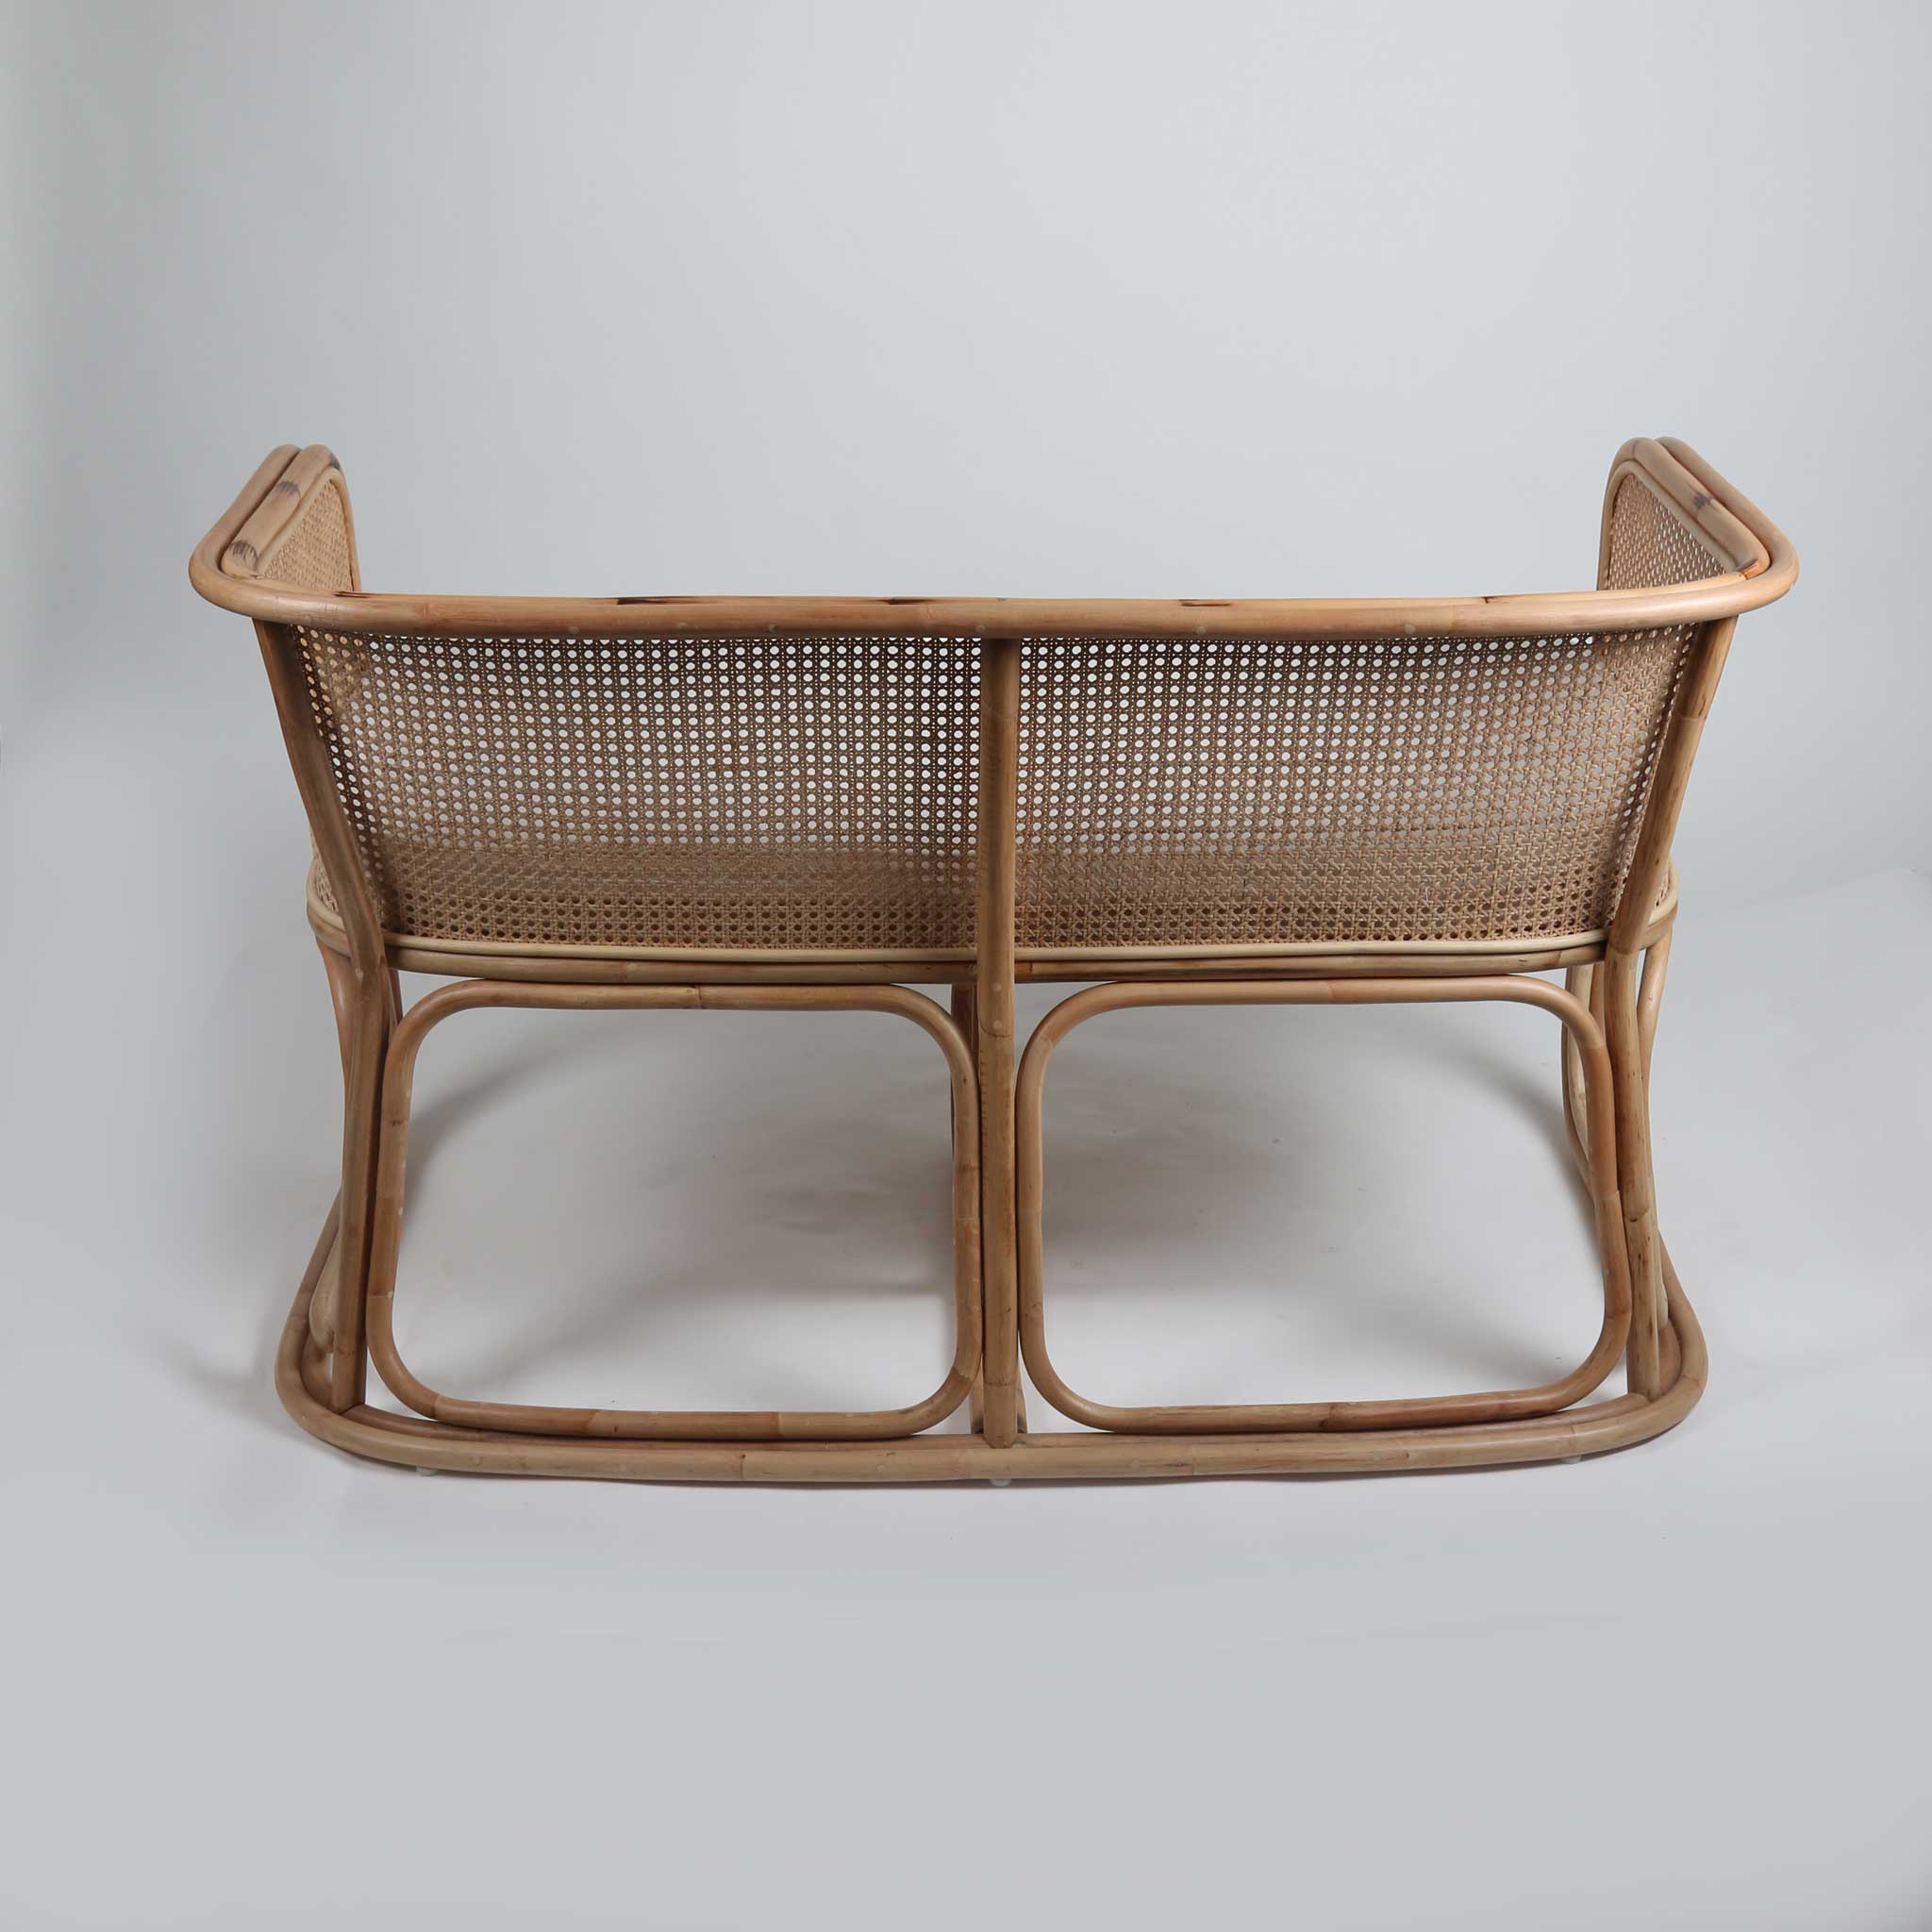 'Pak' Rattan Sofa with Chicken Weave Panelling